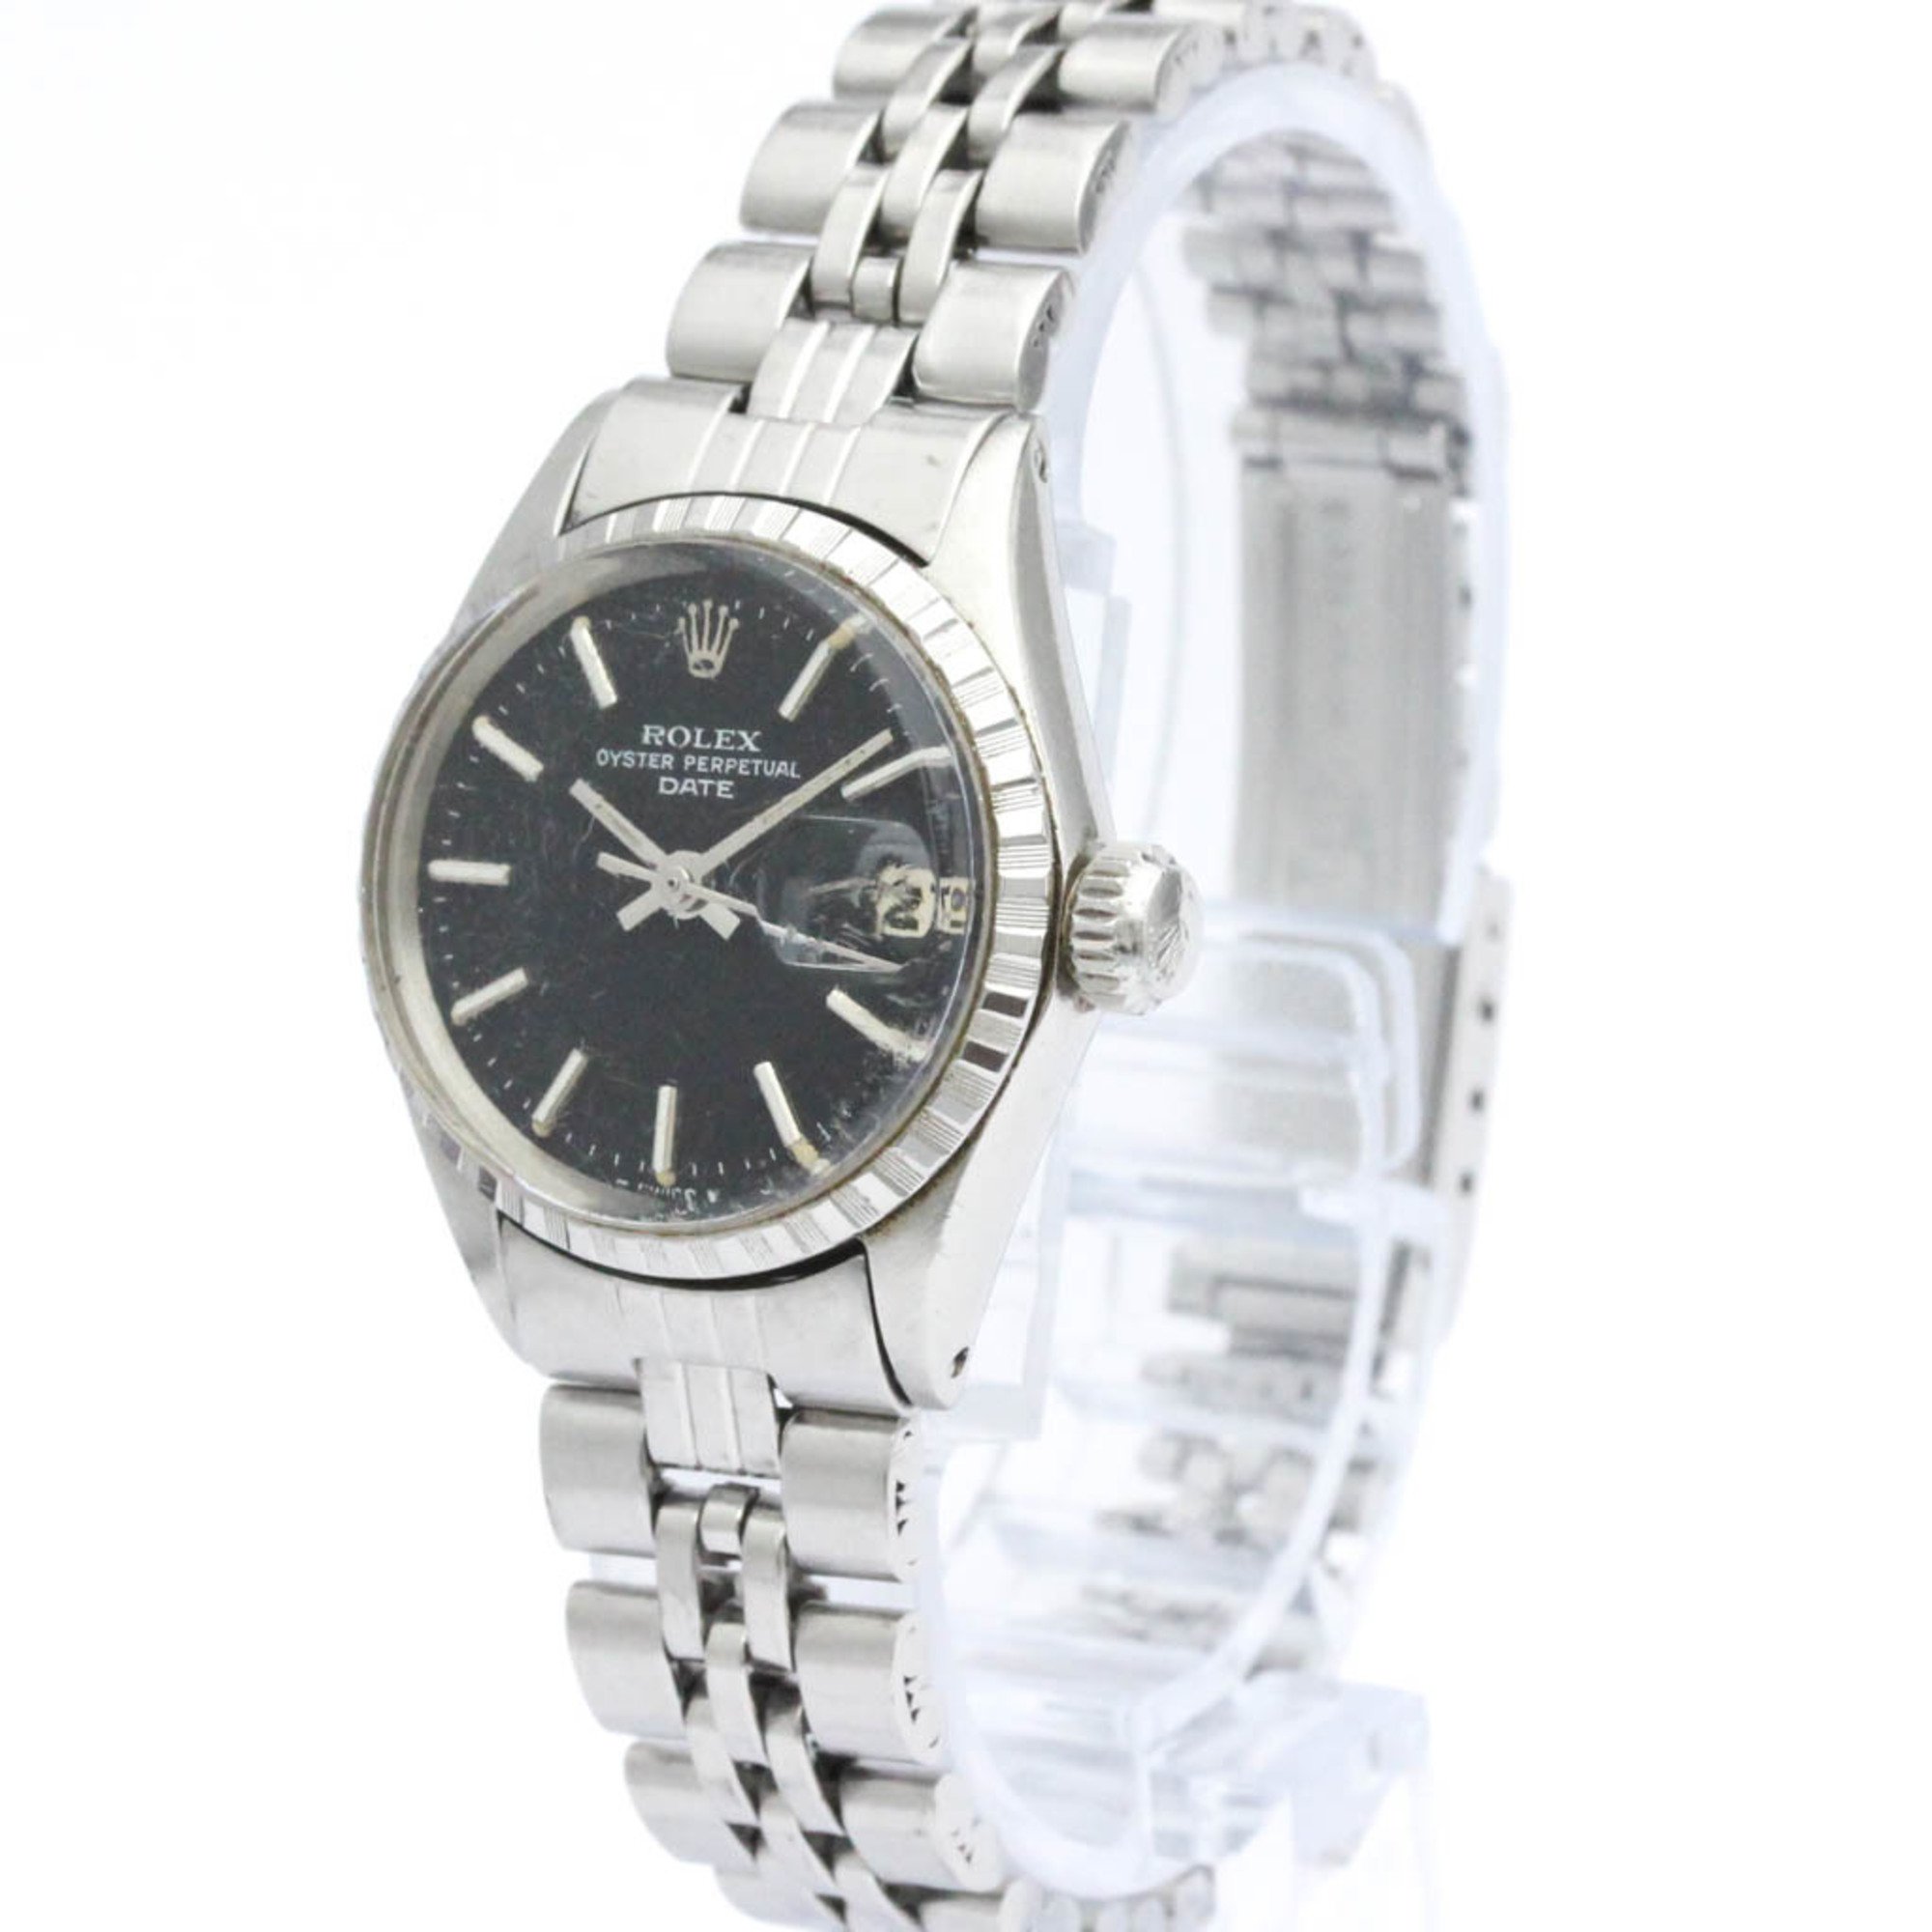 Vintage ROLEX Oyster Perpetual Date 6524 Steel Automatic Ladies Watch BF550657